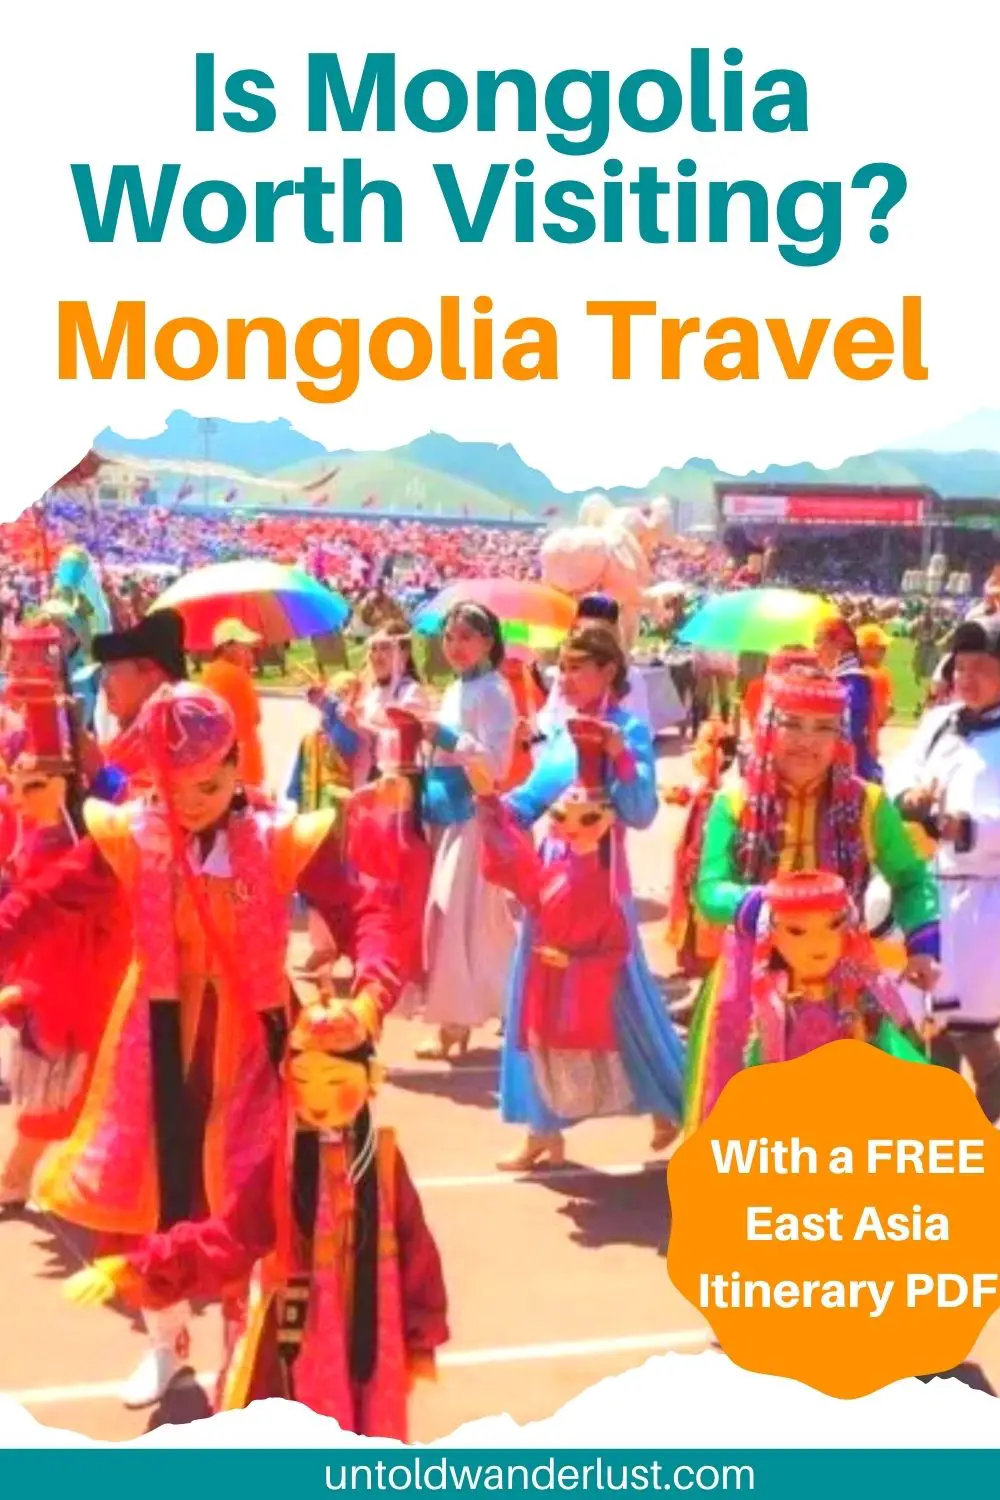 Reasons You Have to Visit Mongolia